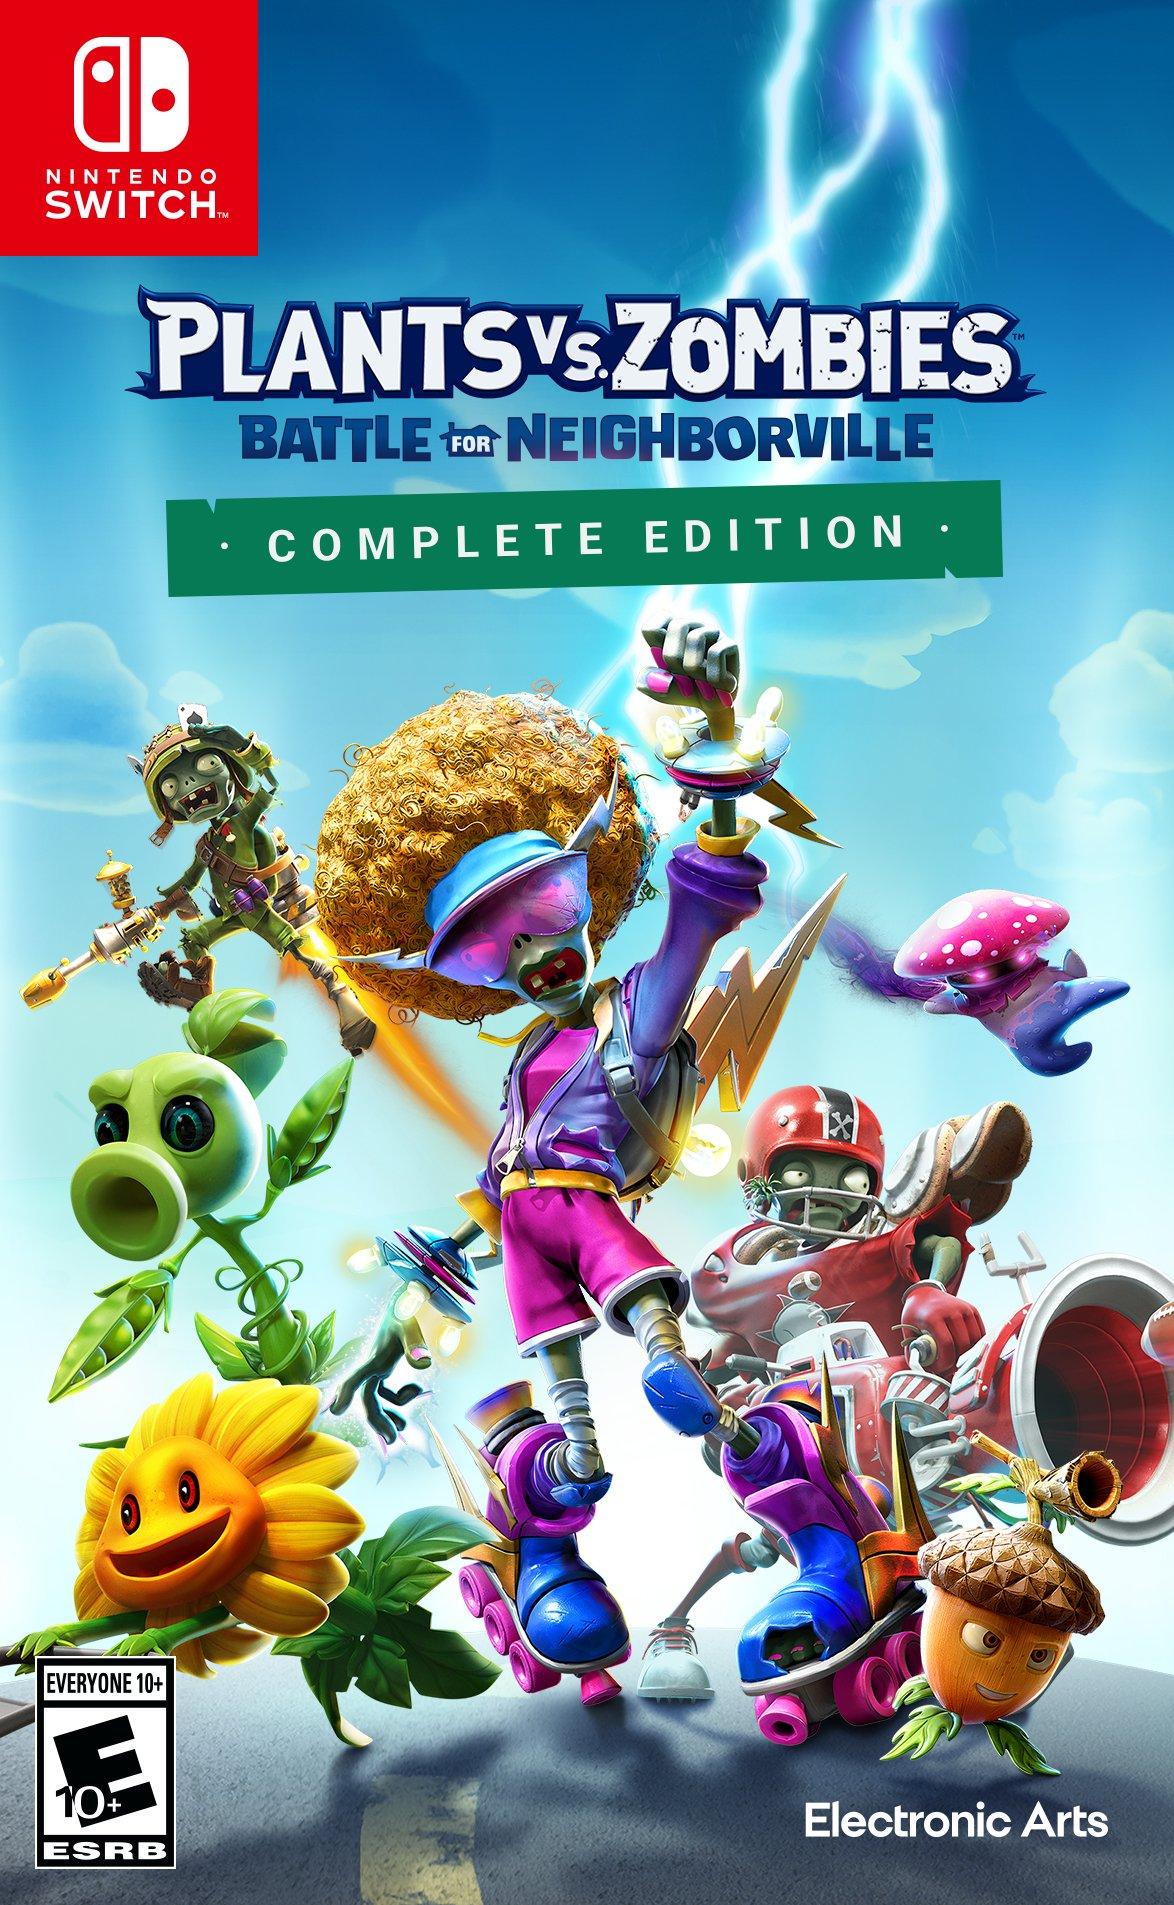 is battle for neighborville on switch